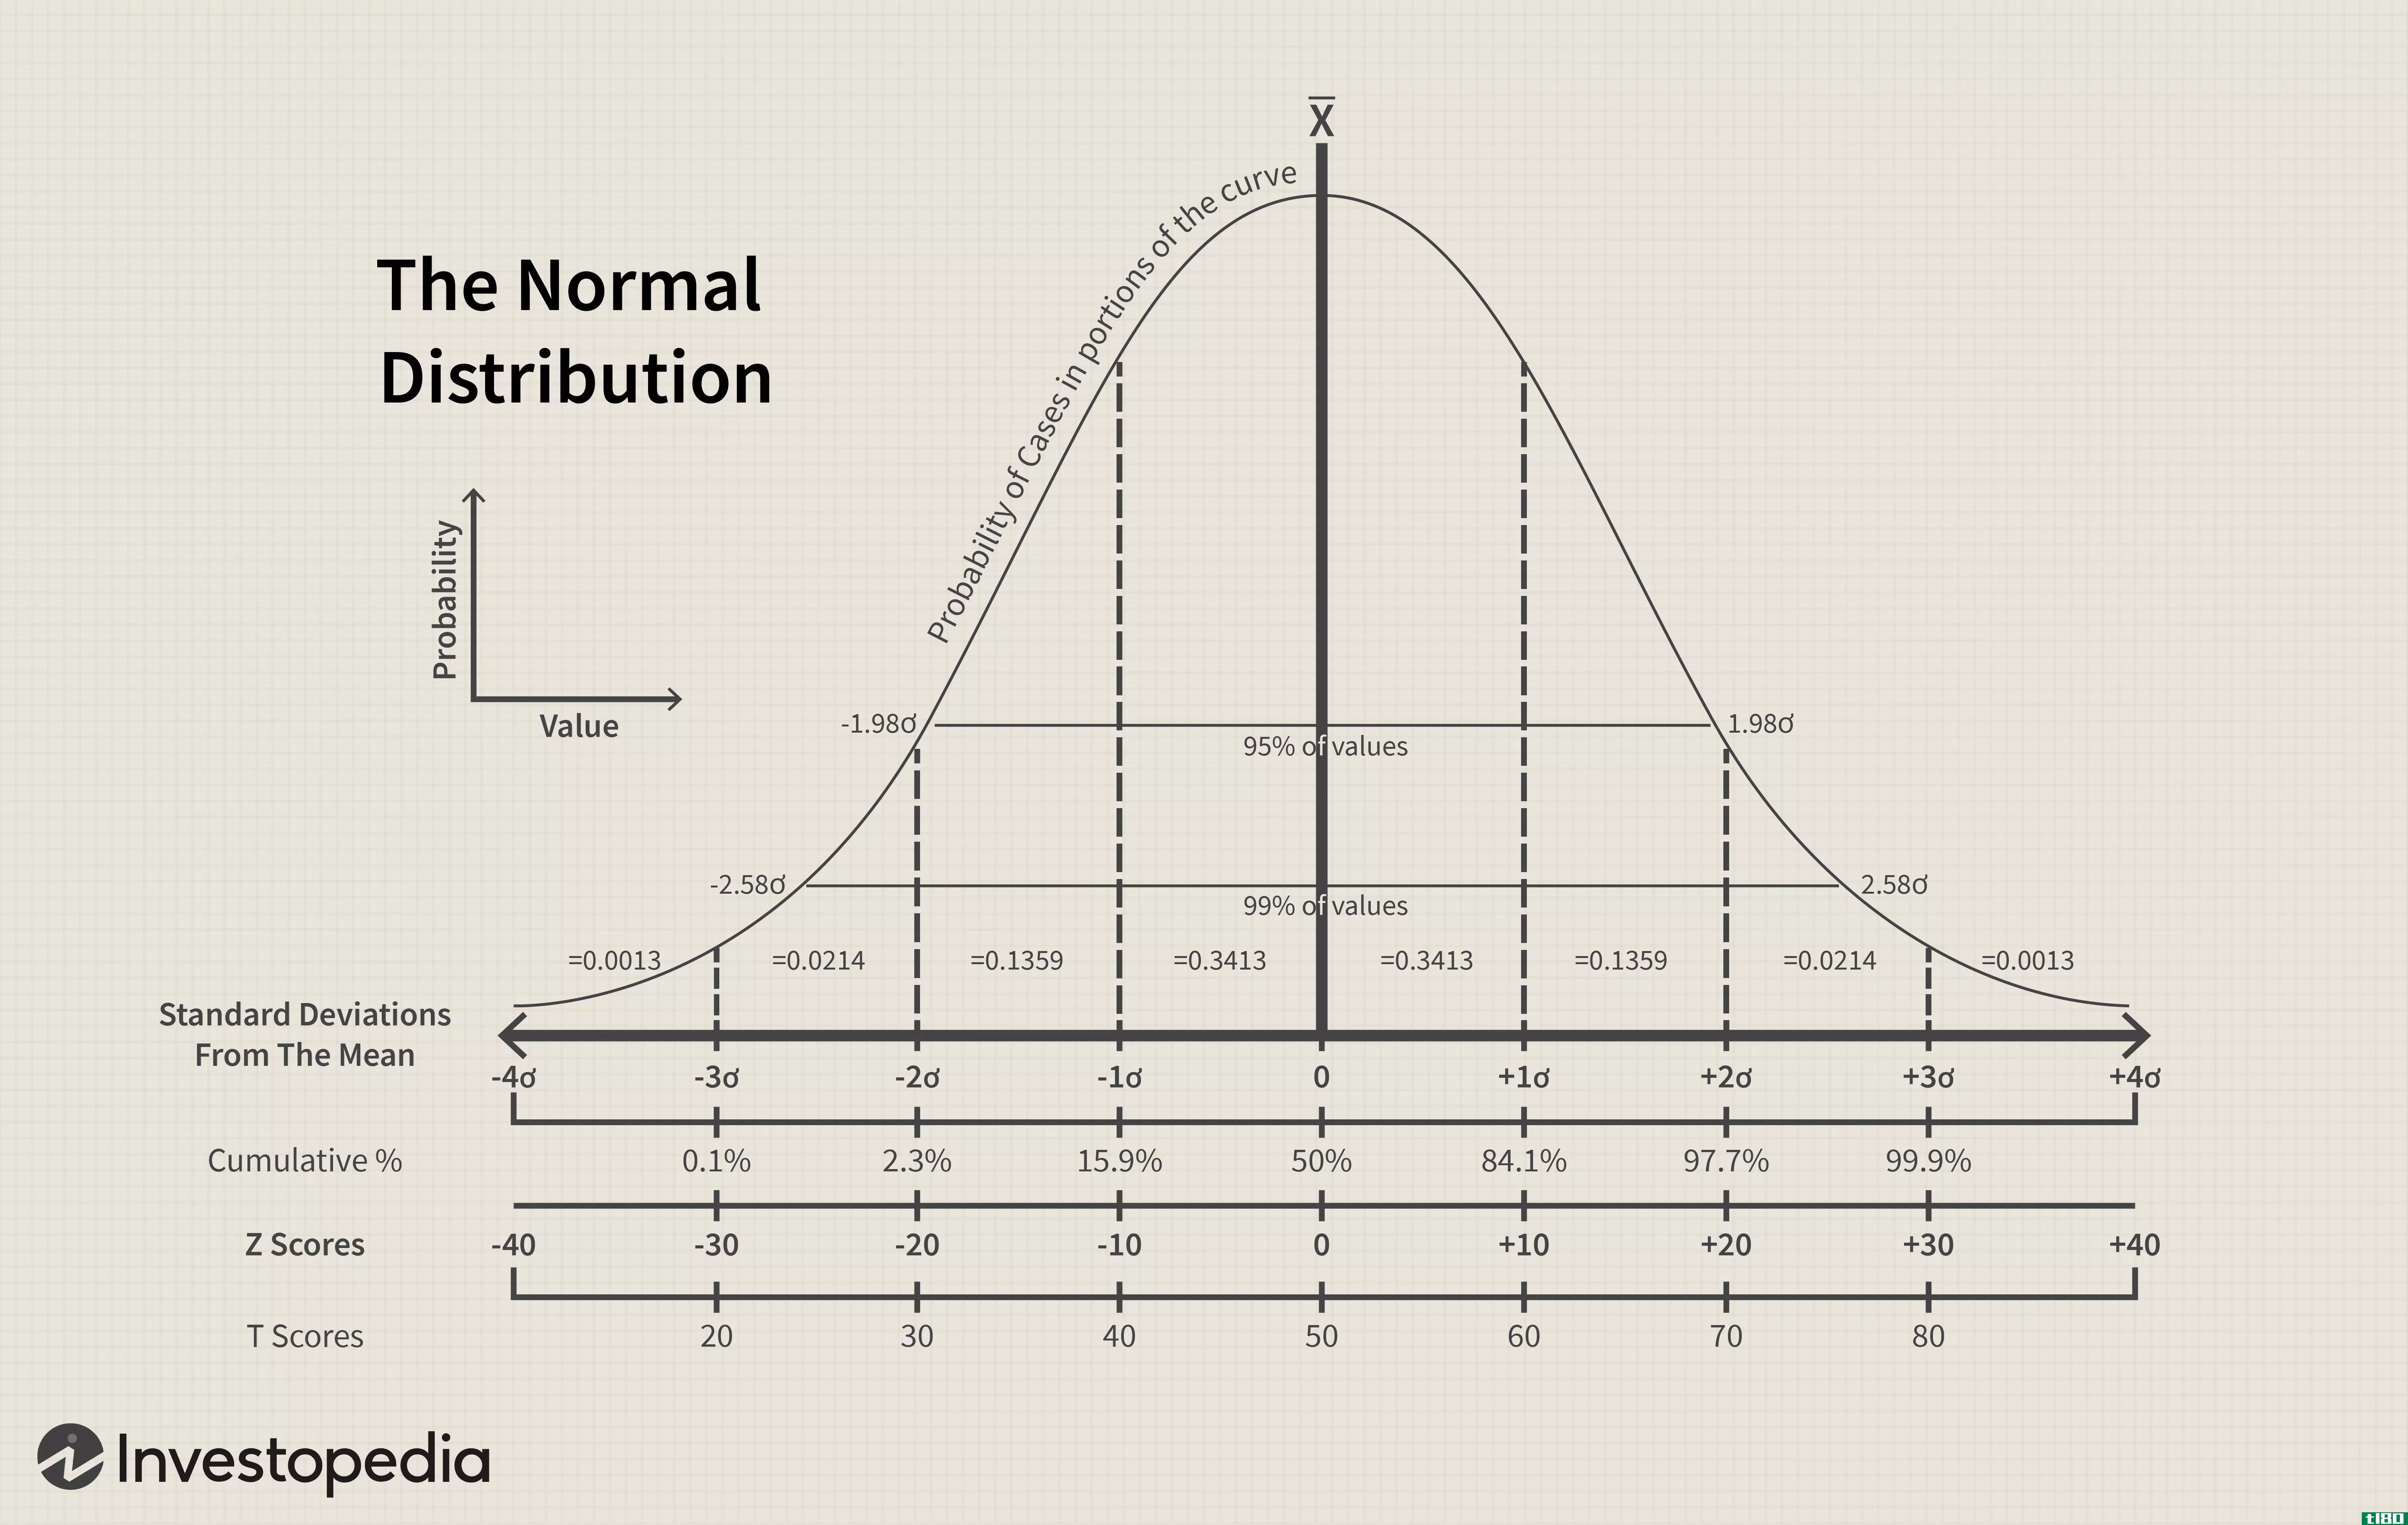 The "Bell Curve", or Normal Distribution